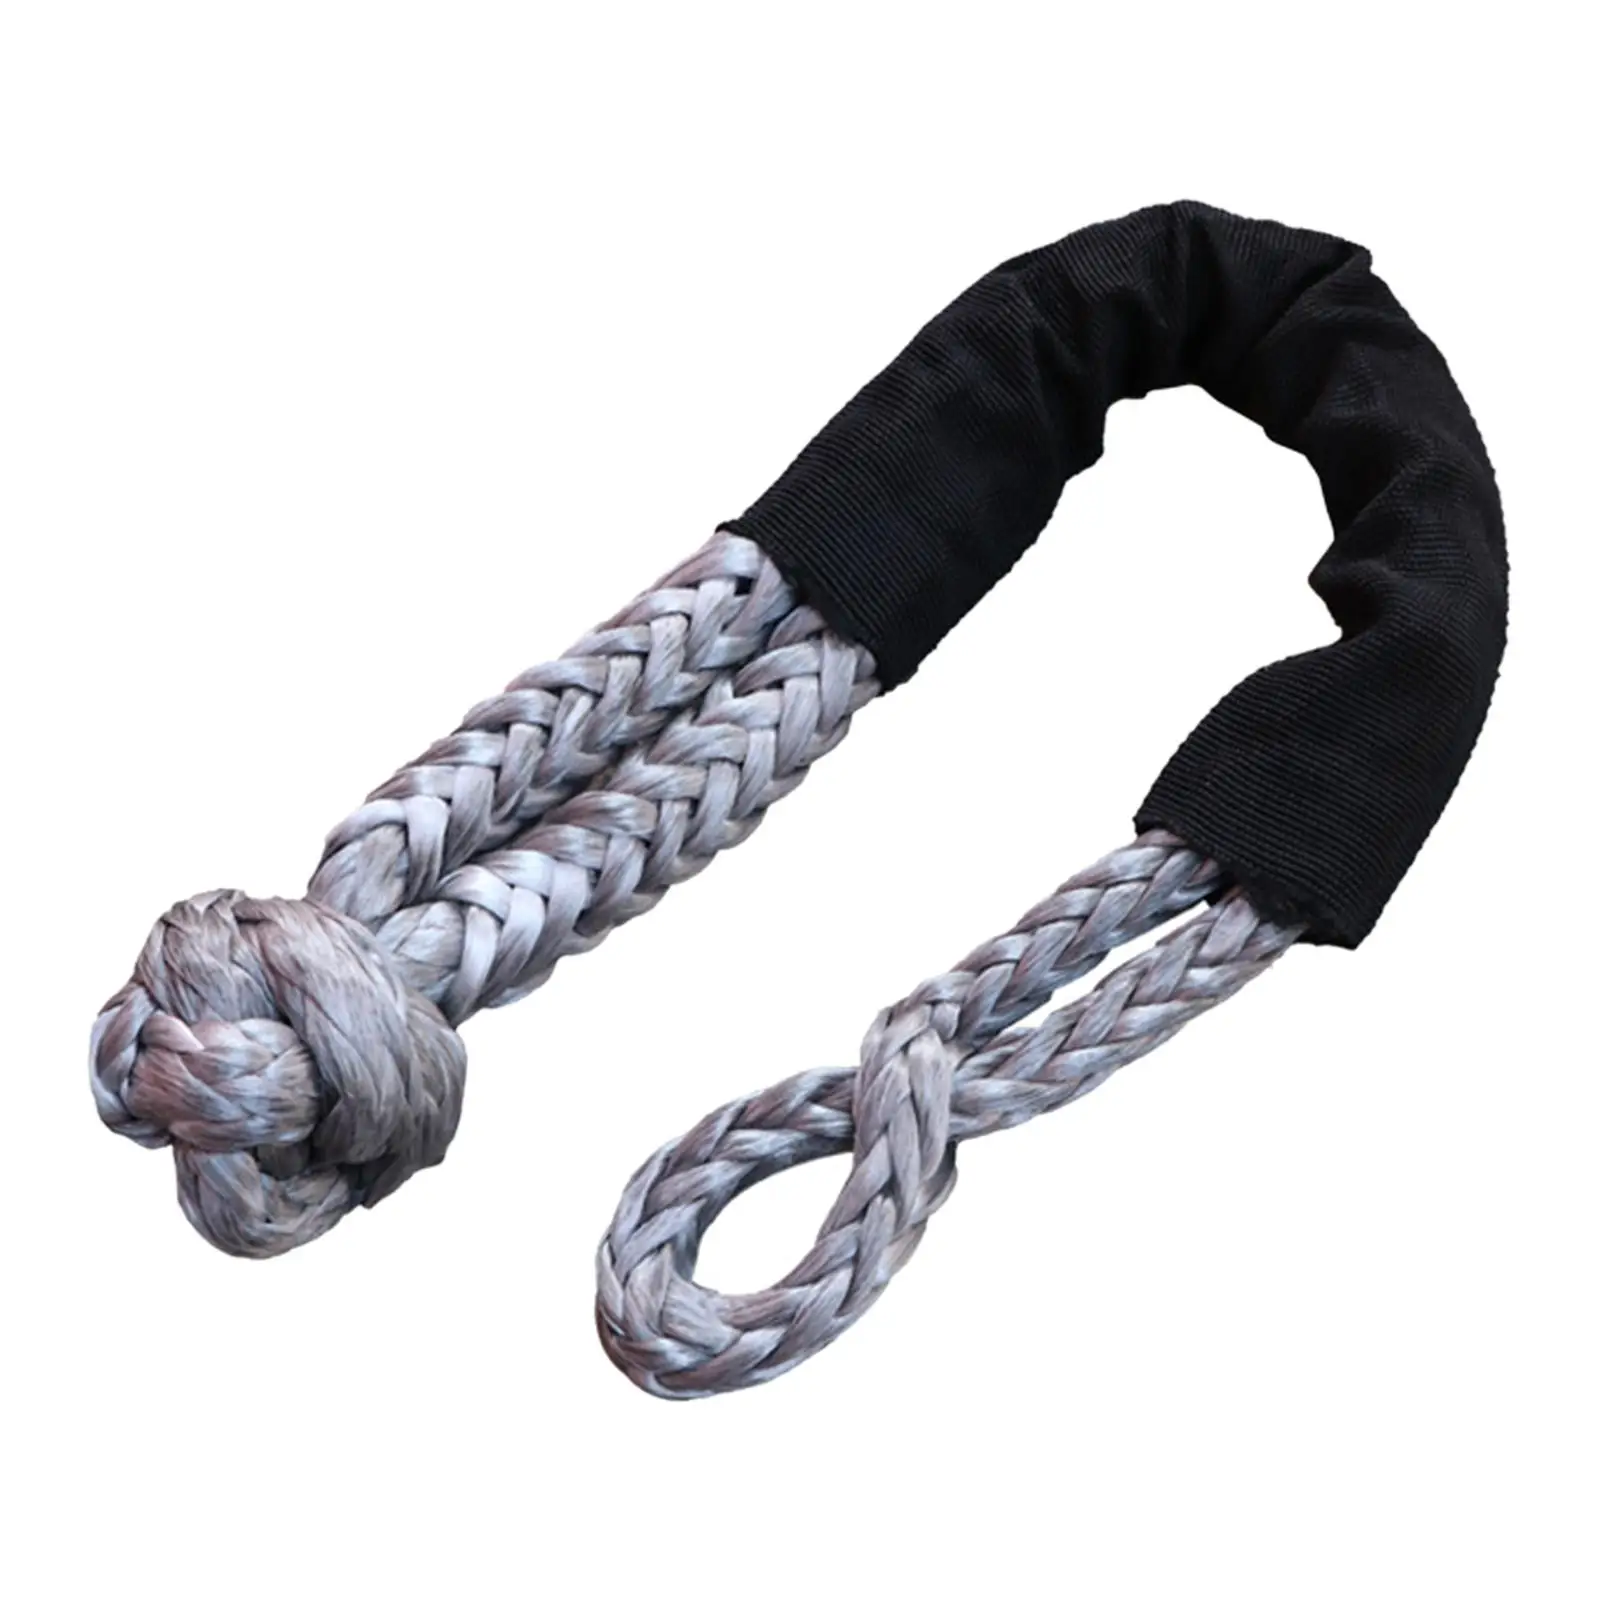 Soft Shackle Durable Easy to Use Lightweight Strong Breaking Strength Towing Rope for Winches Sailing Trucks Vehicles SUV